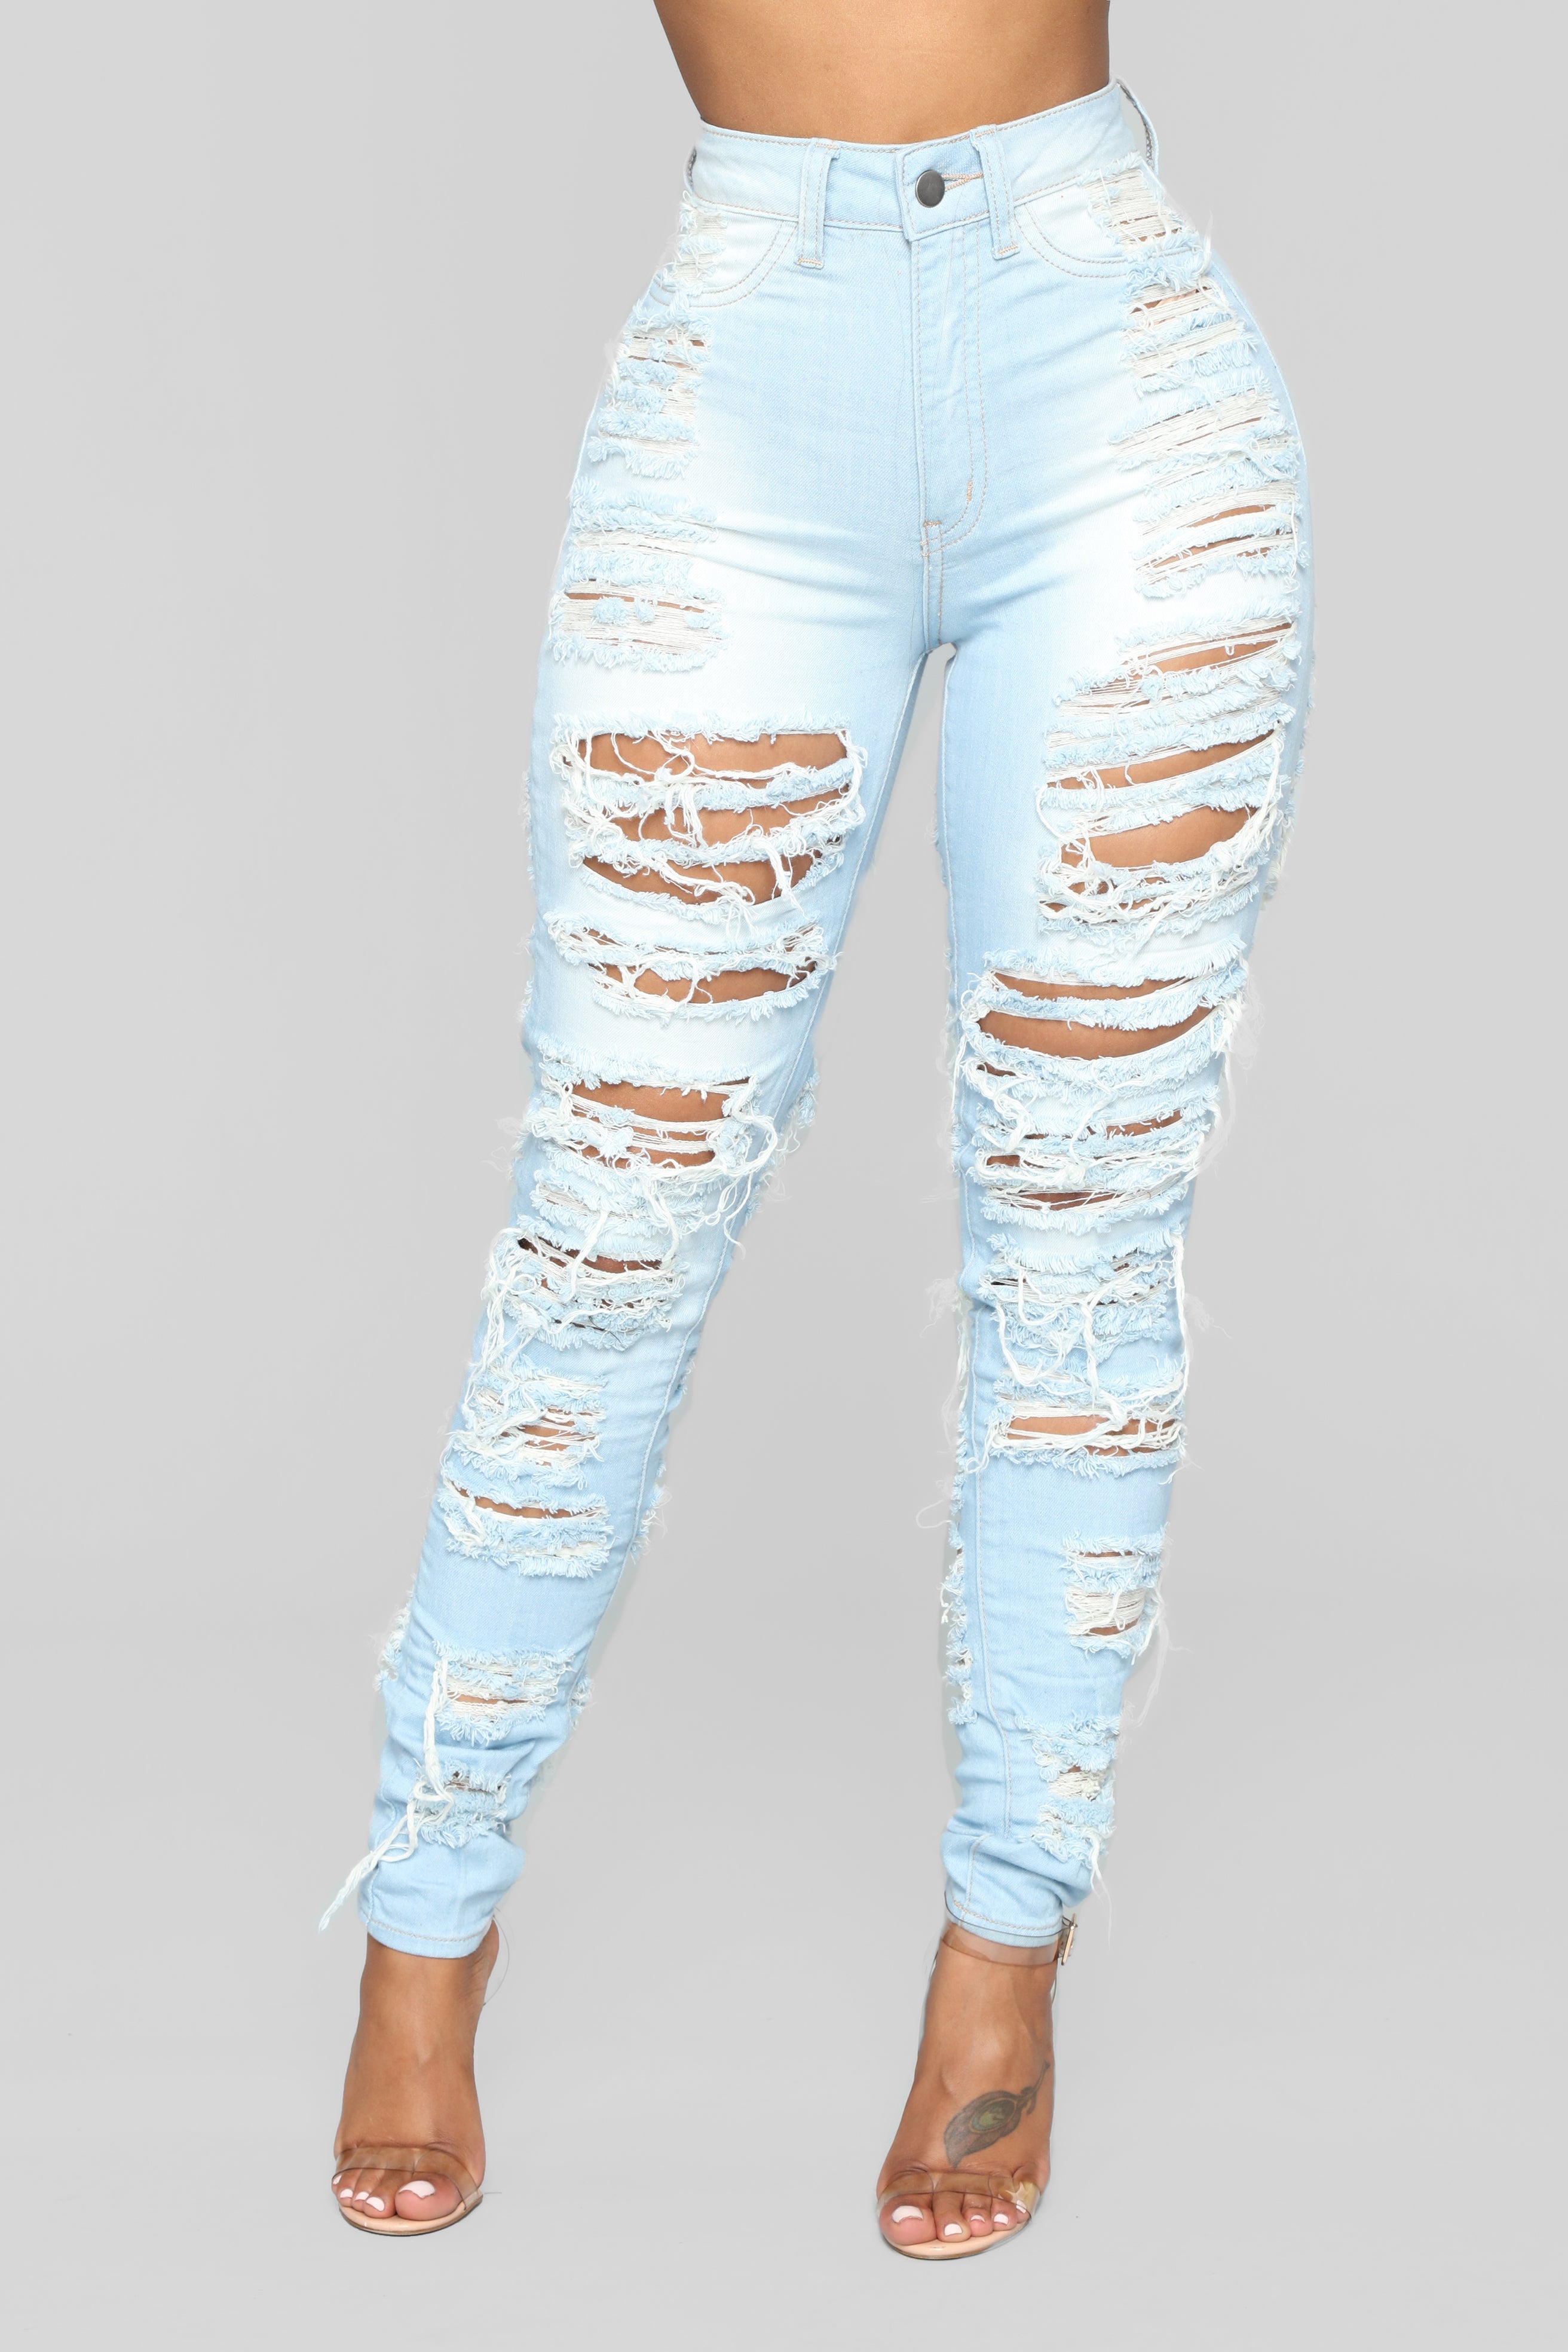 Caught In Your Love Distressed Jeans - Light Blue Wash